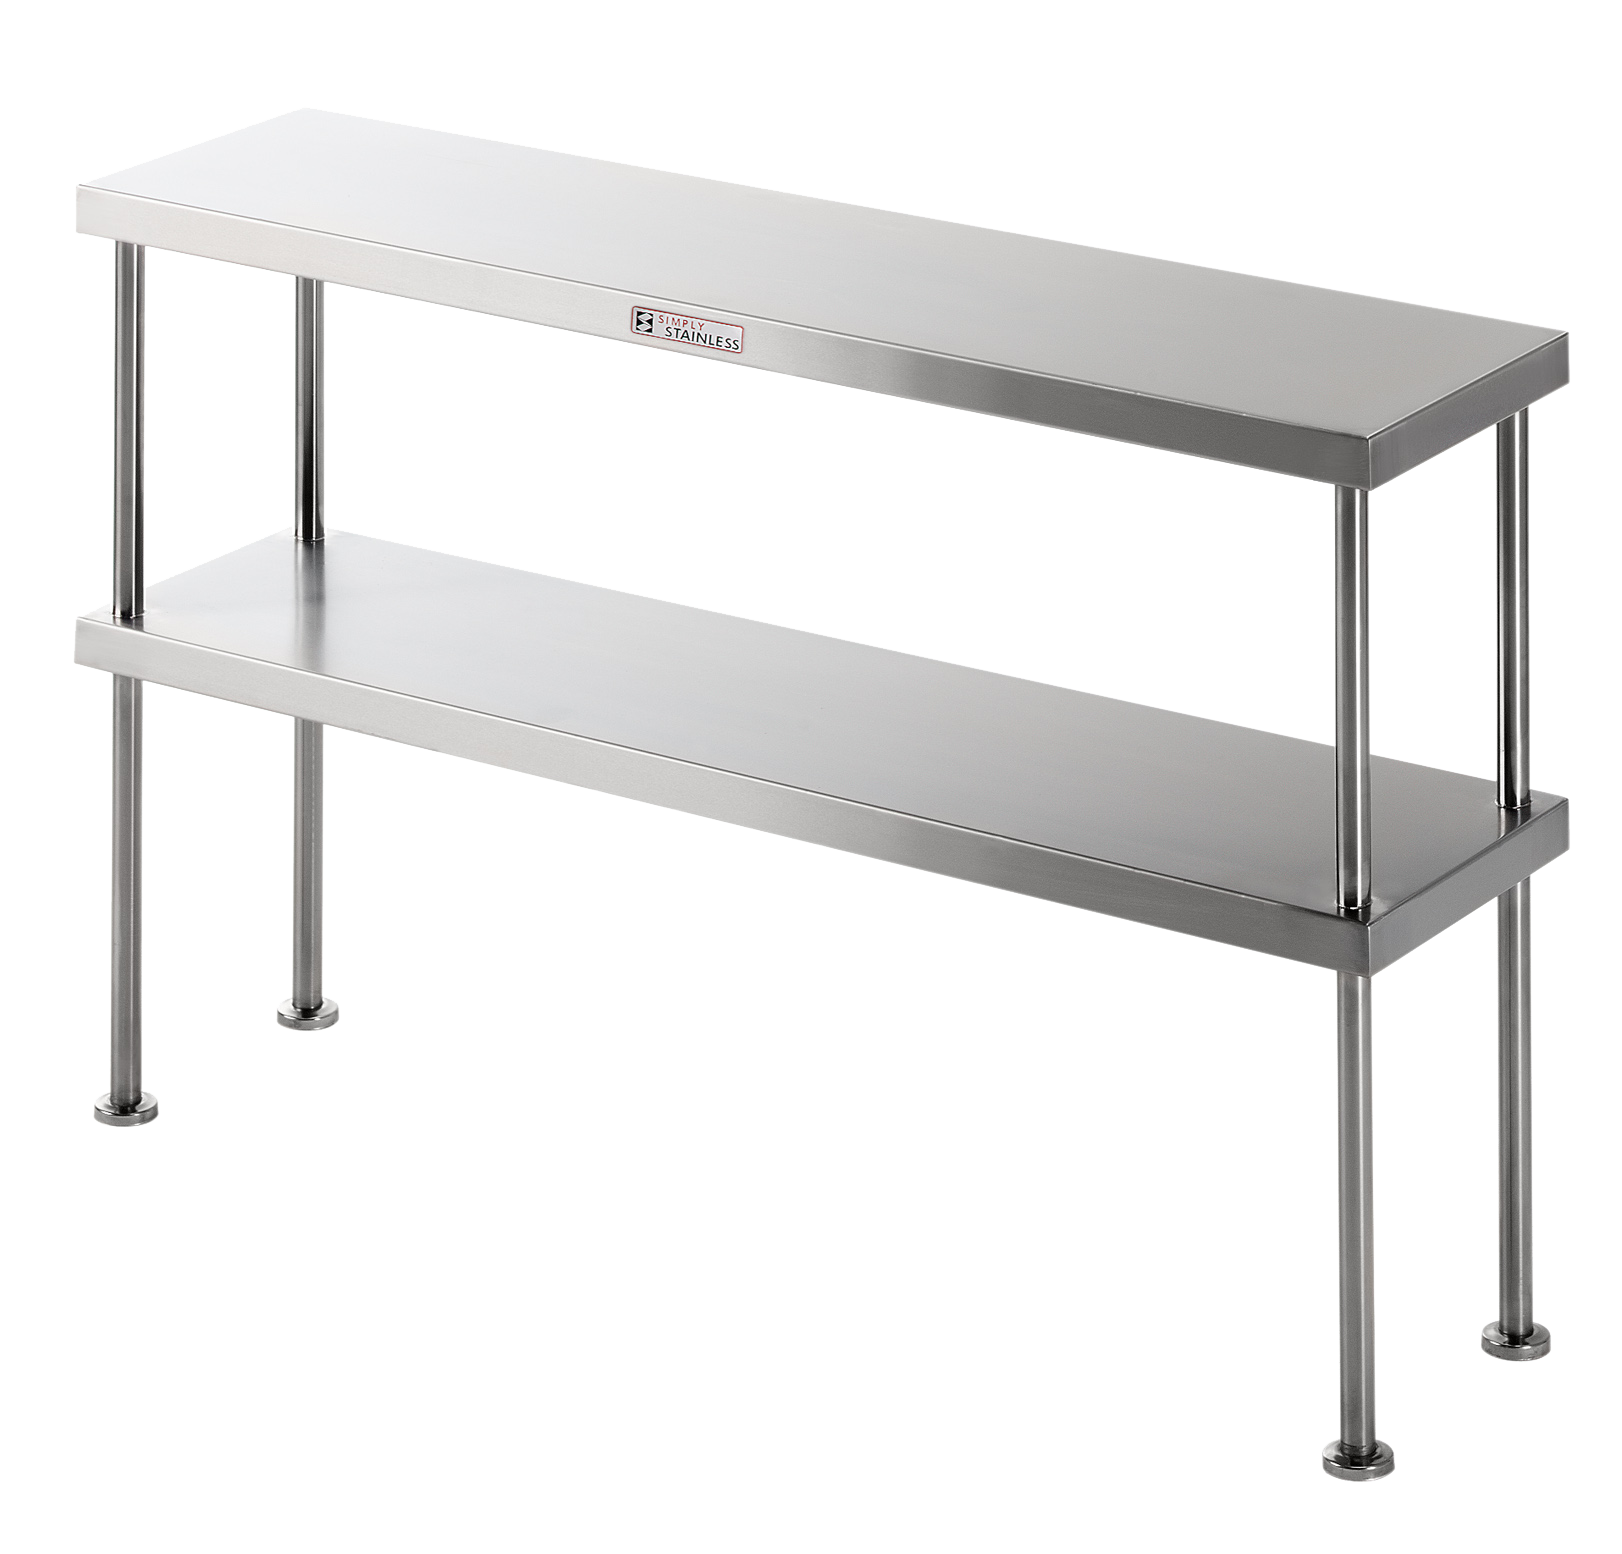 Simply Stainless 1200mm wide Double Bench Over Shelf SS13.1200